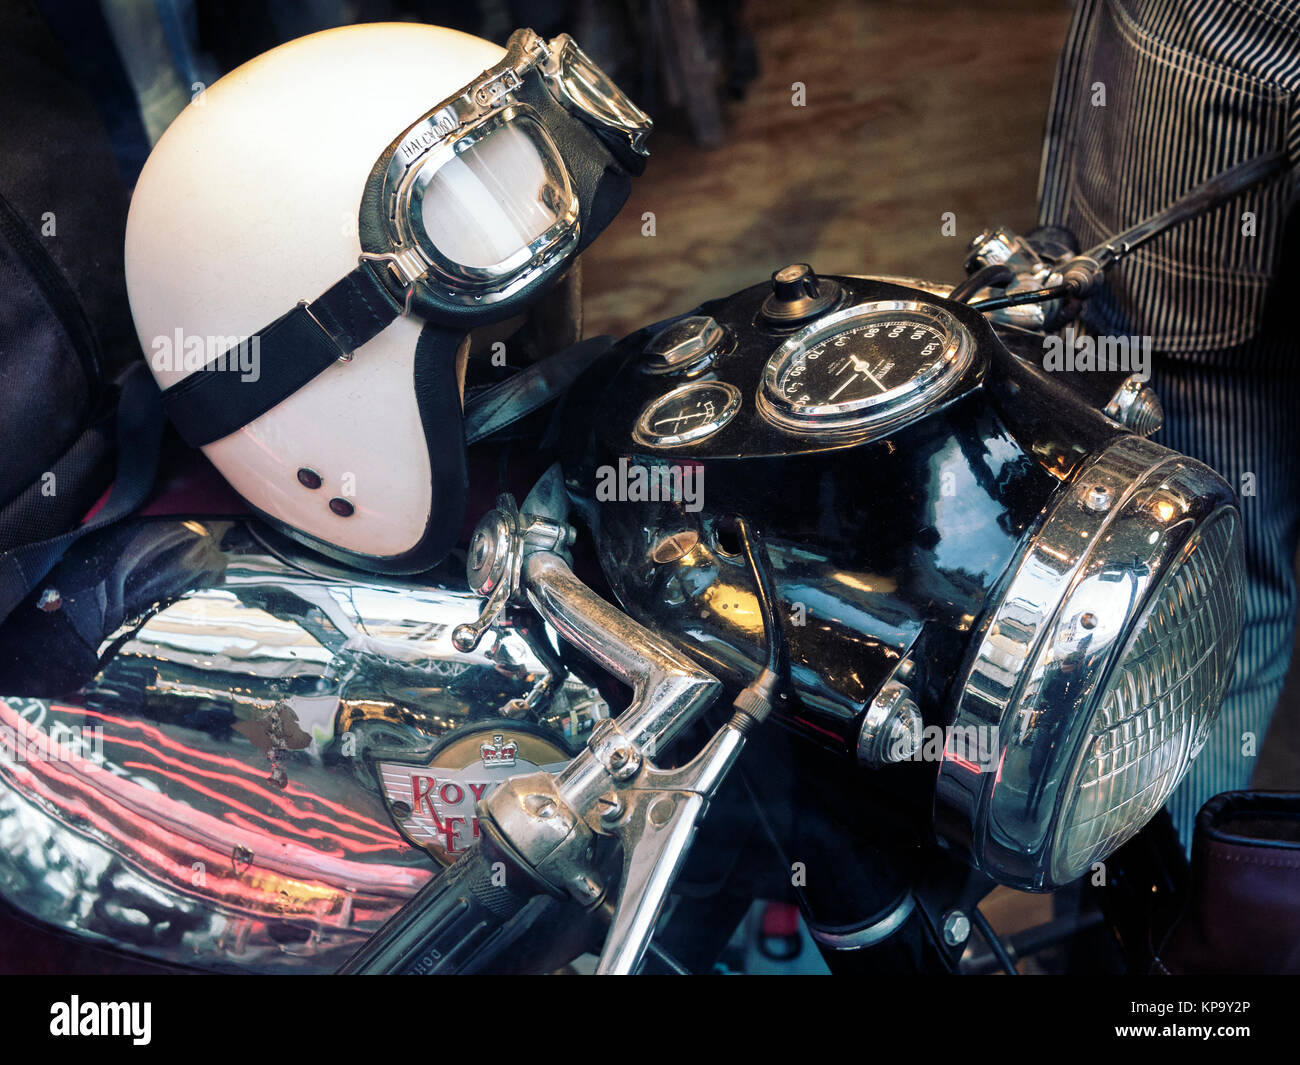 Royal Enfield motorcycle with classic crash helmet on the petrol tank Stock Photo